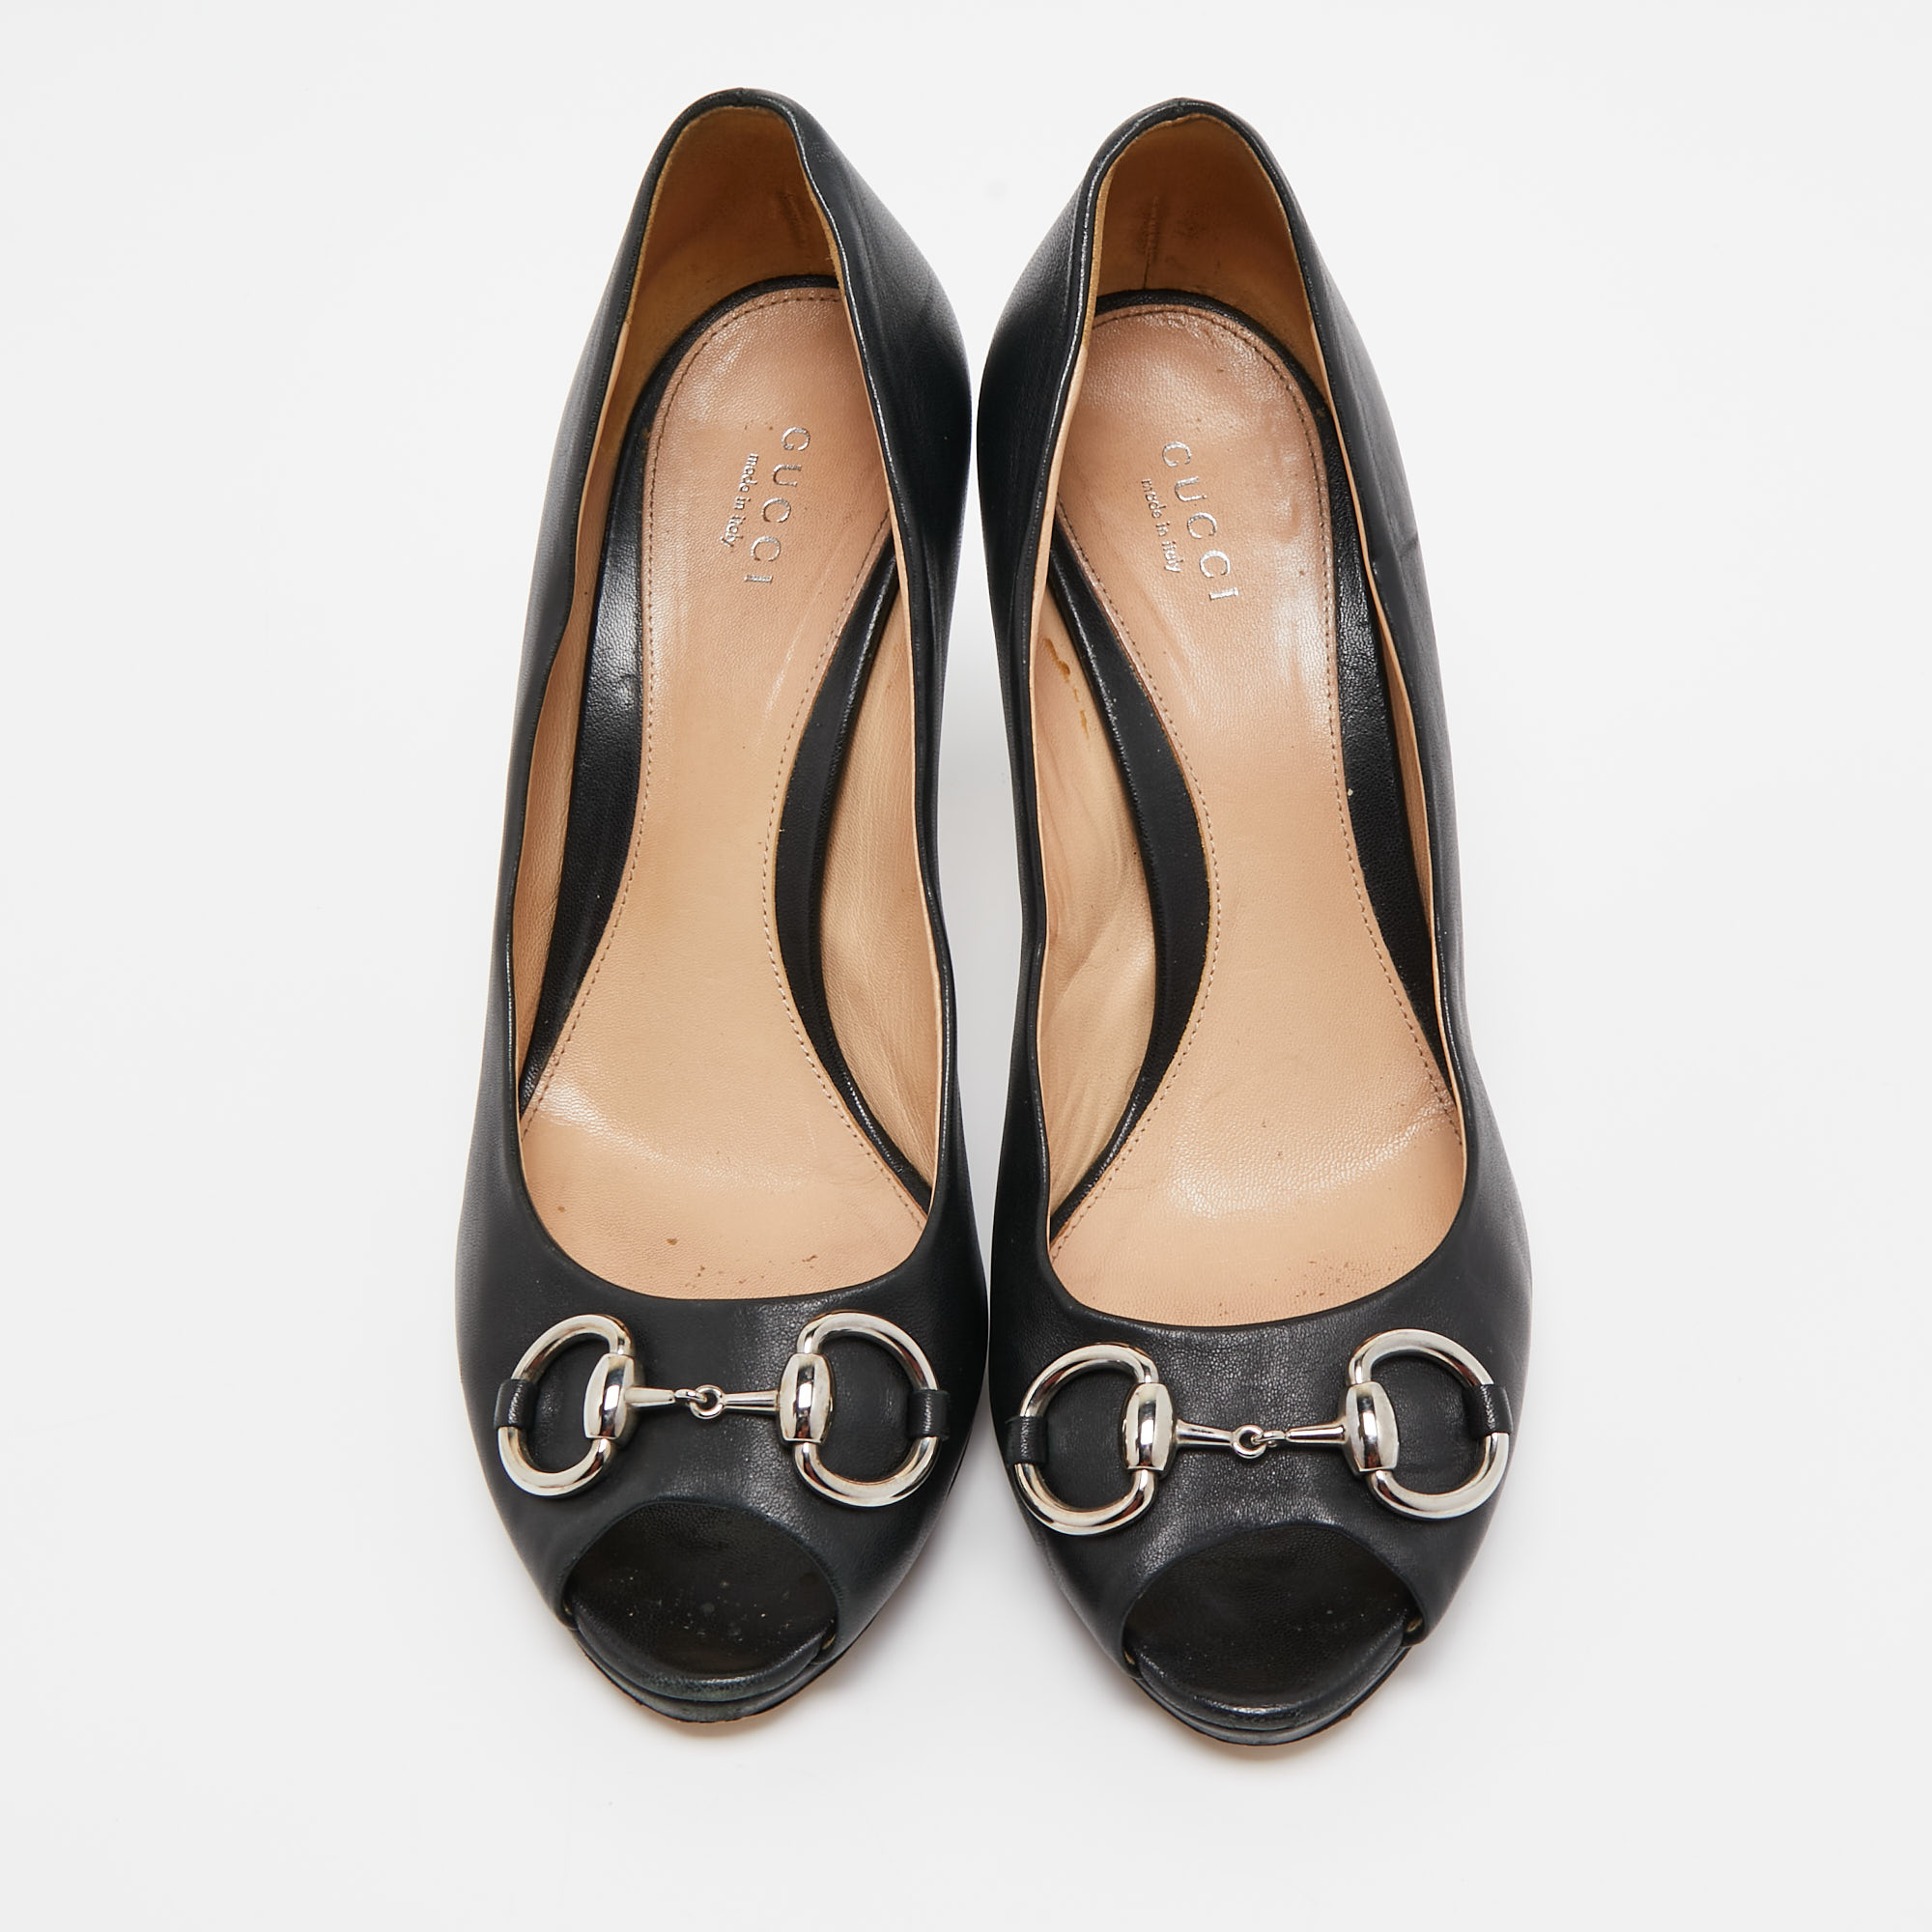 Gucci Black Leather Hollywood Pumps Size 39